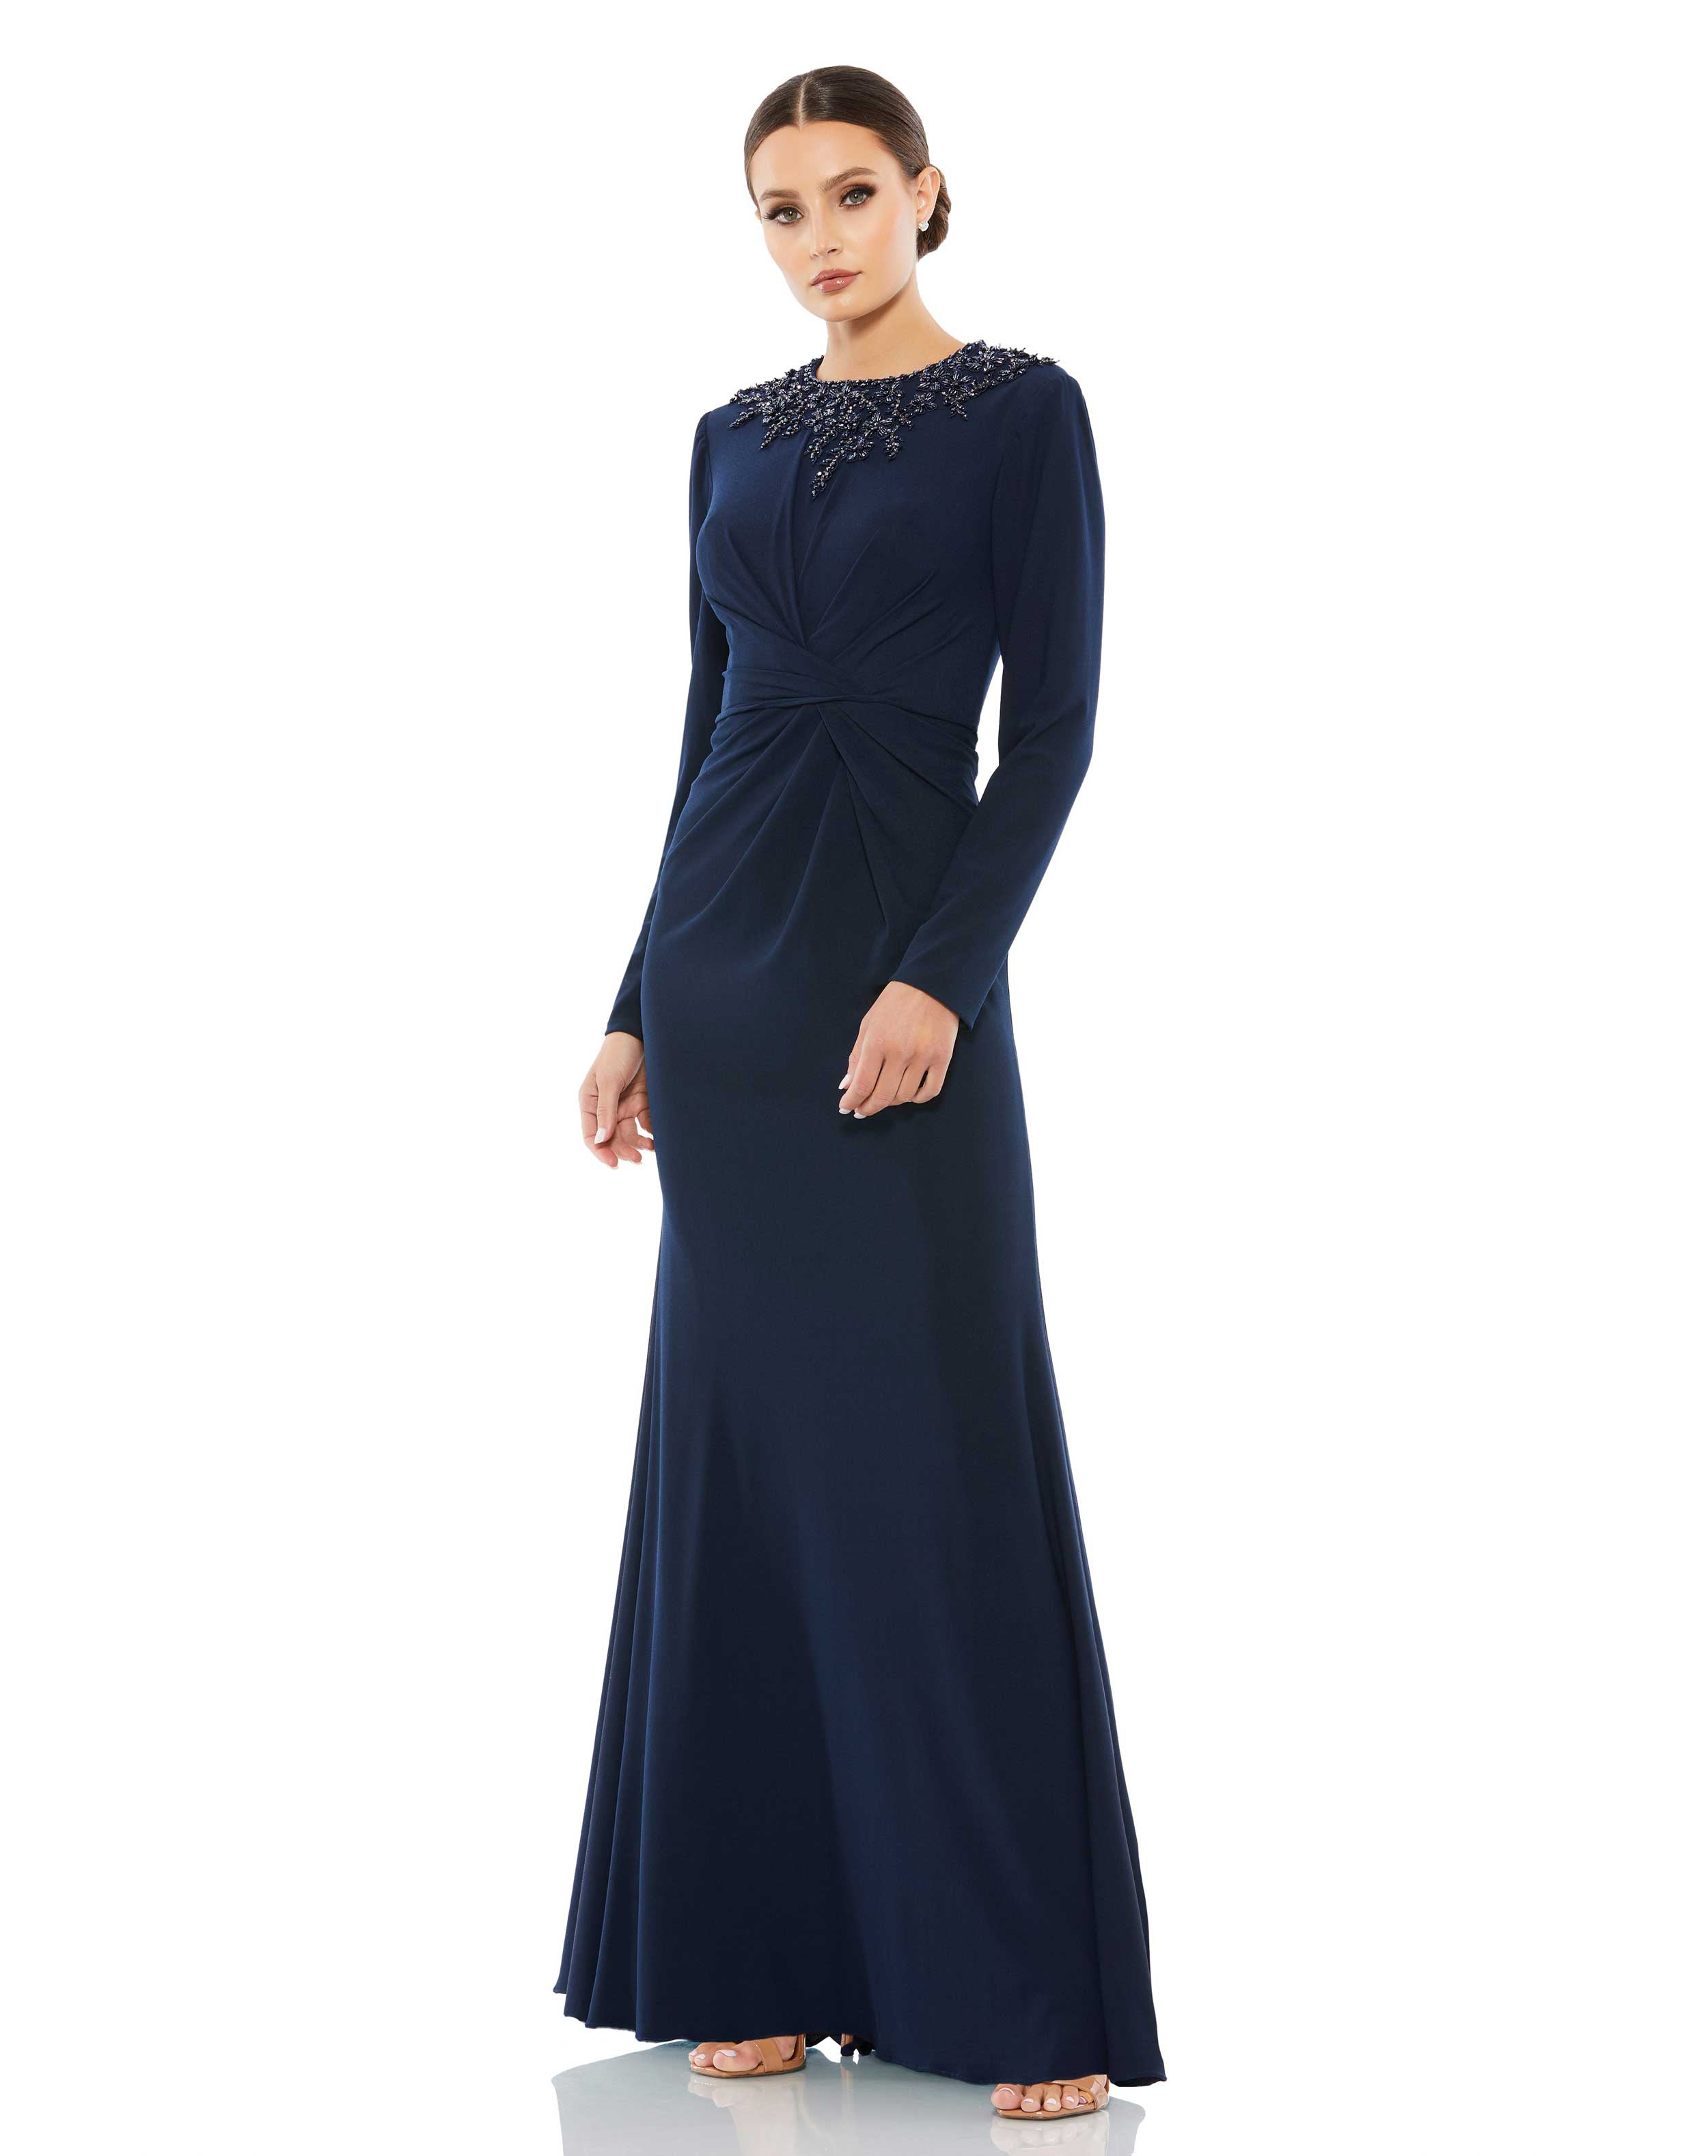 Beaded High Neck Front Twist Long Sleeve Trumpet Gown - FINAL SALE